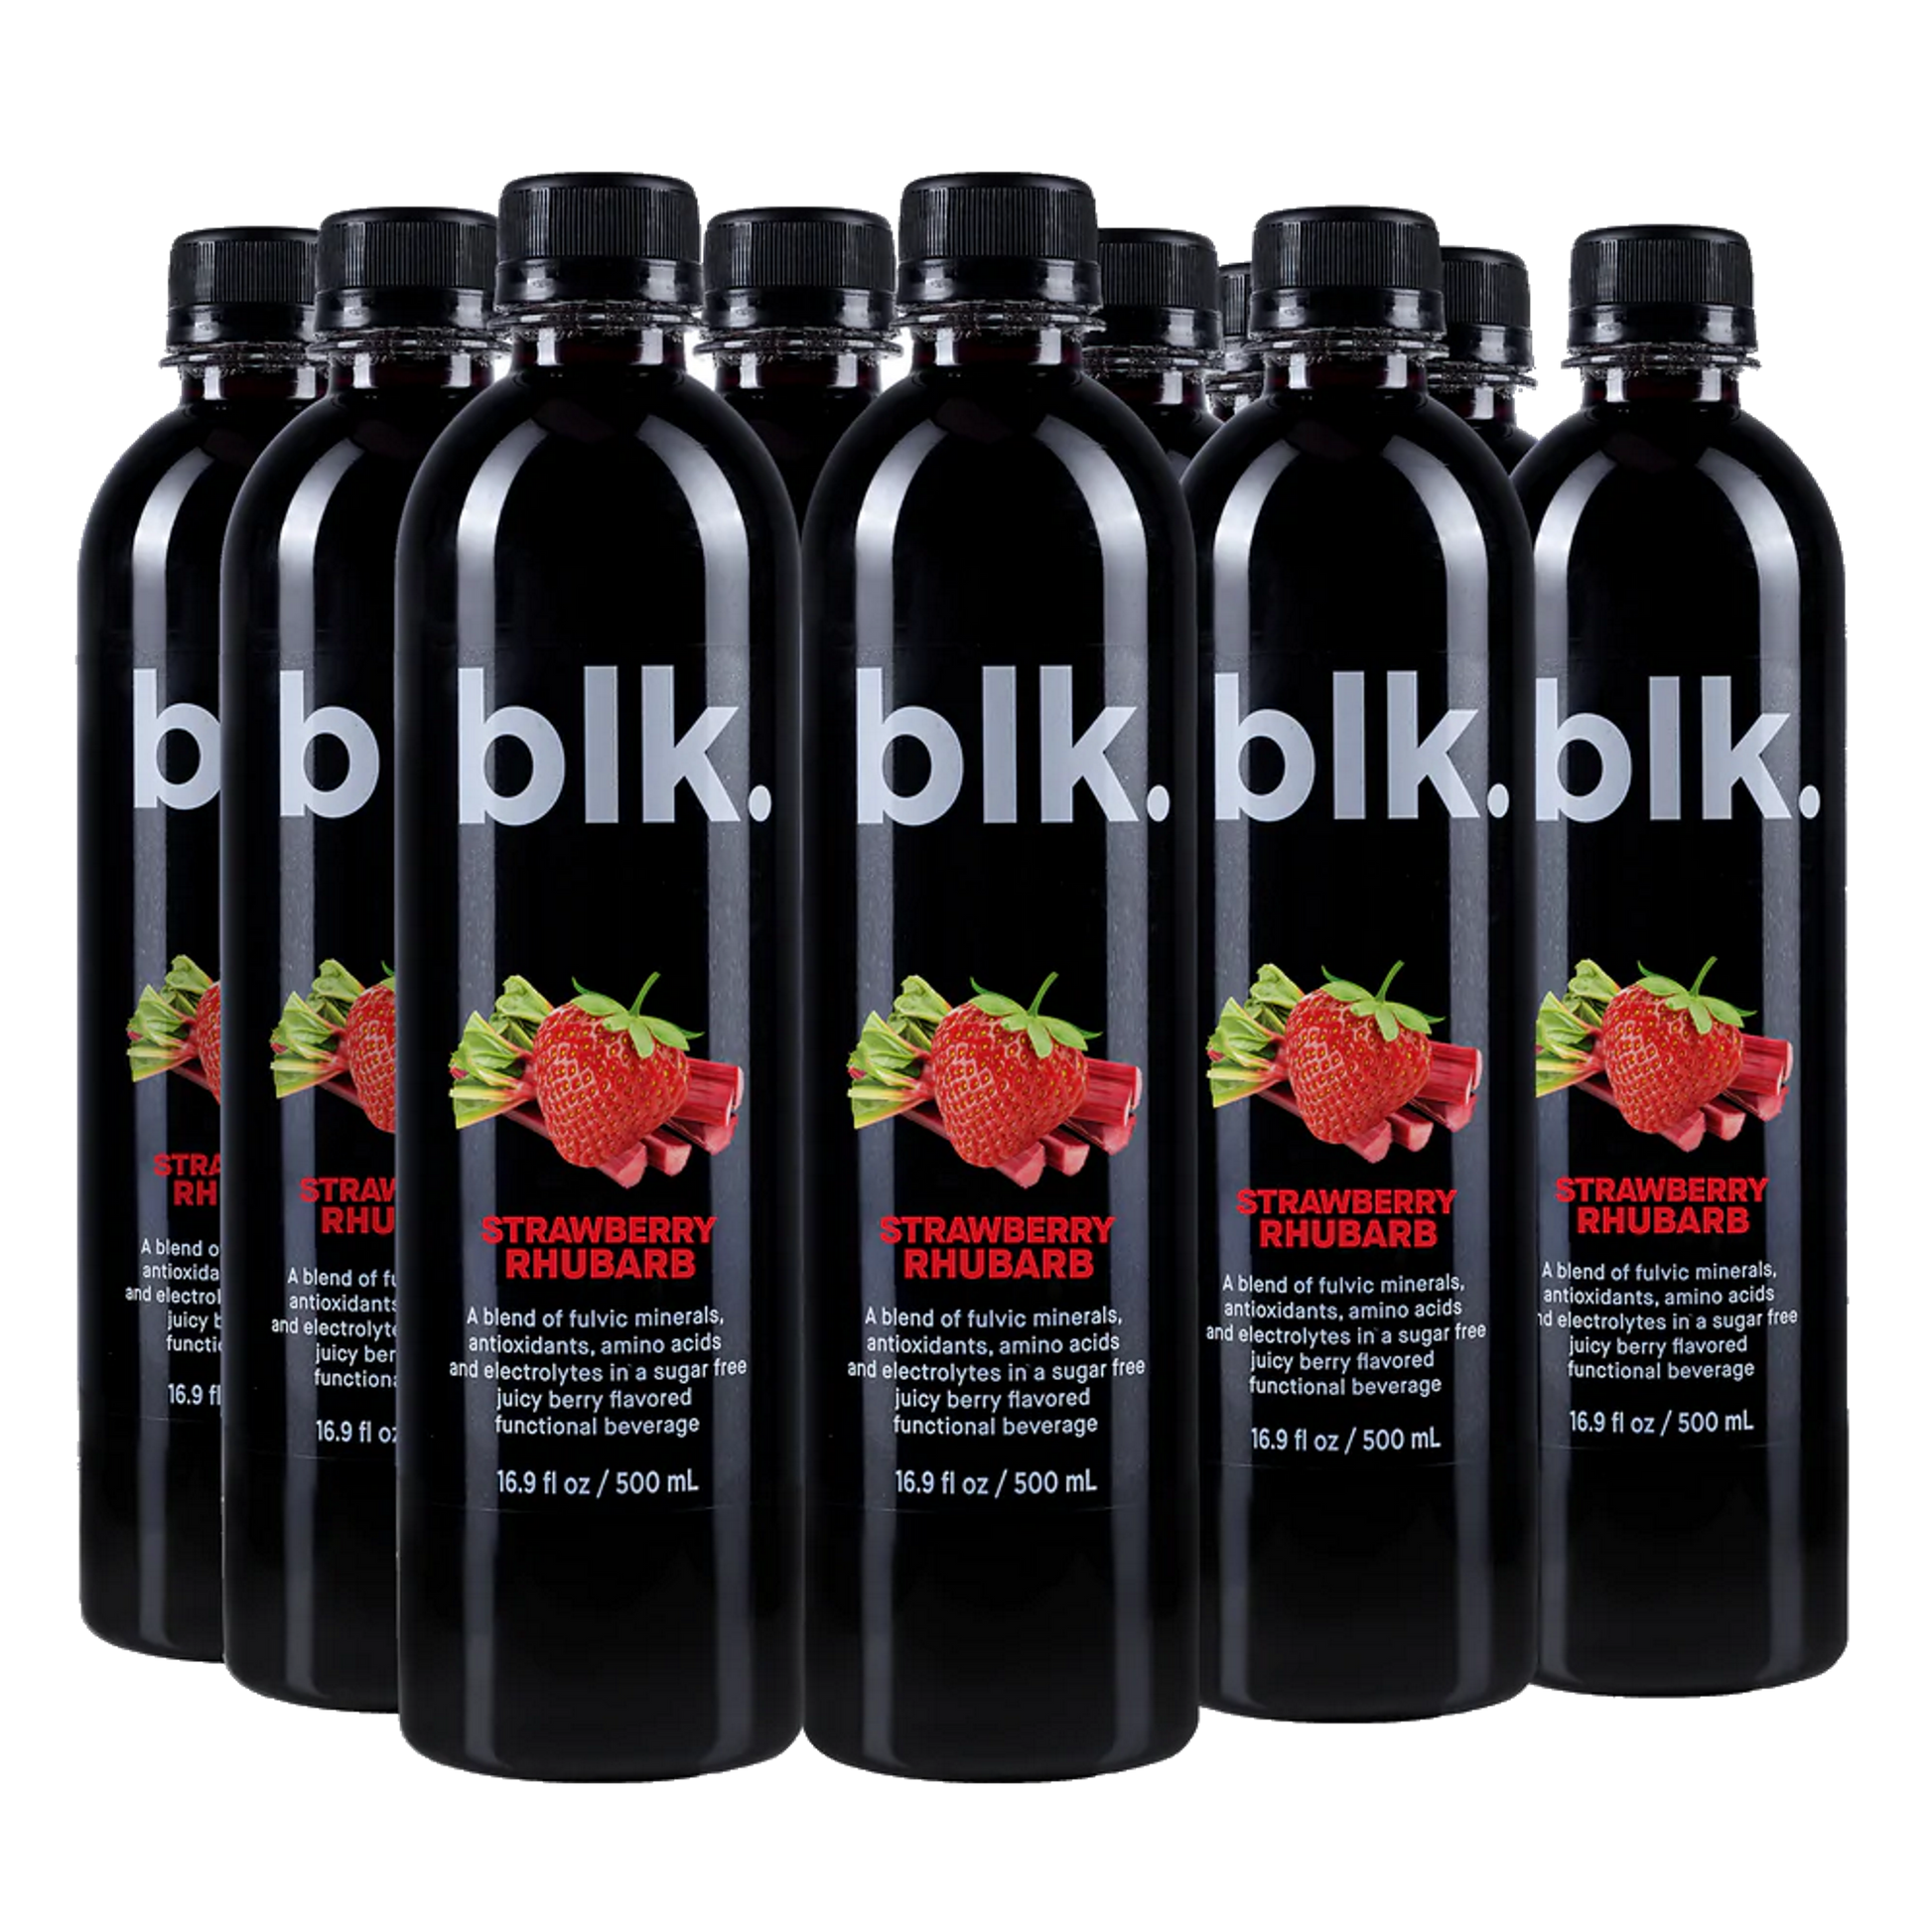 blk strawberry rhubarb - ridiculously good tasting recovery beverage